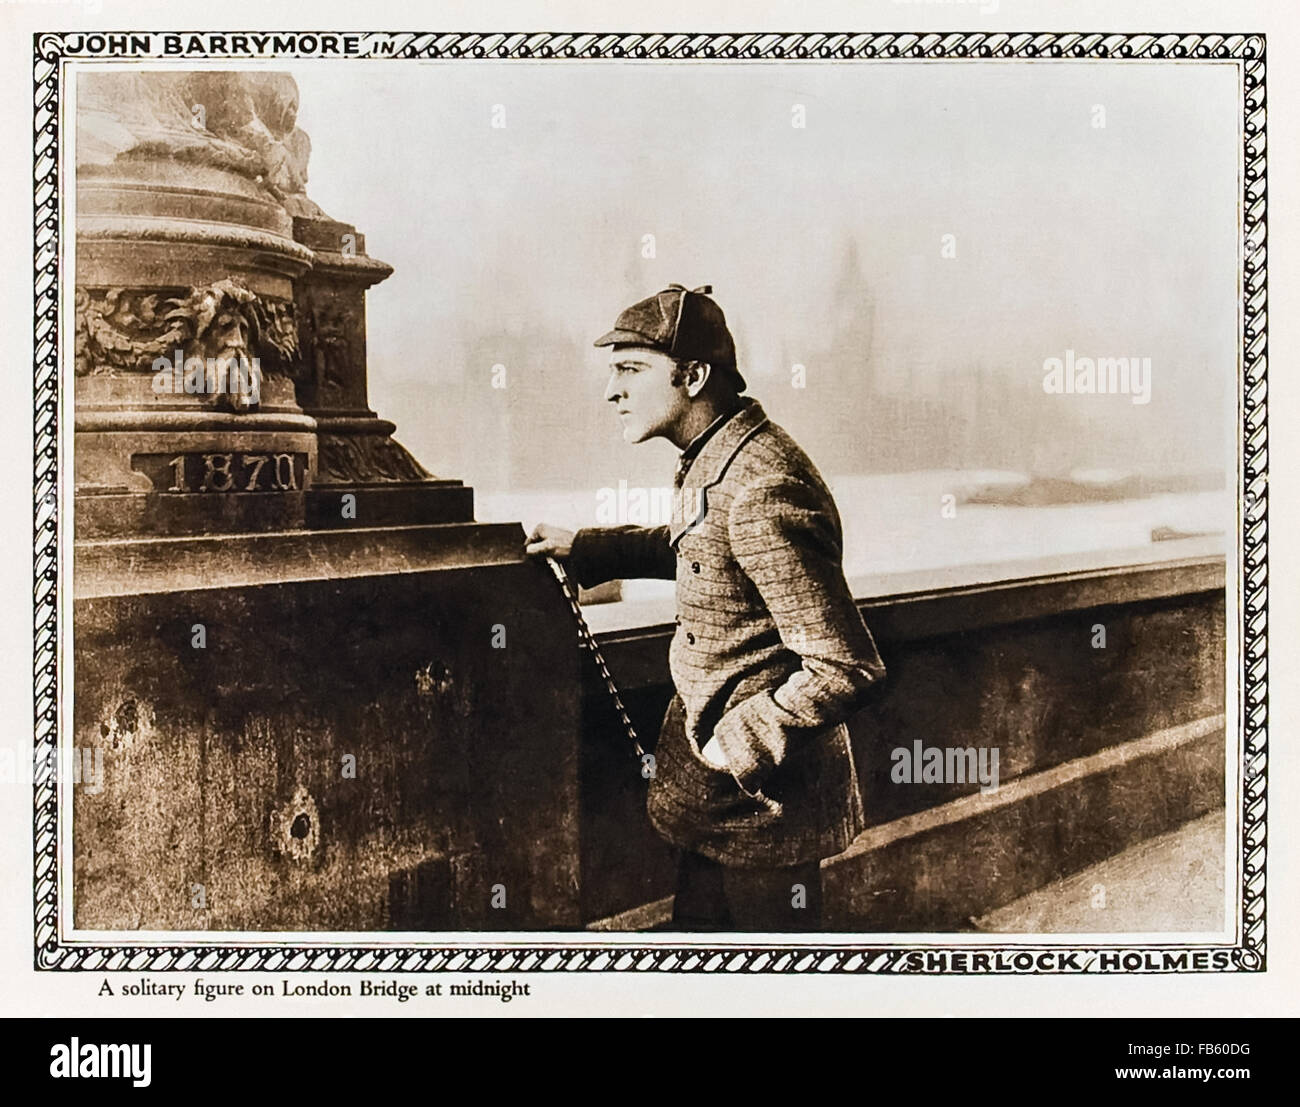 'A solitary figure on London Bridge at midnight' Lobby card showing John Barrymore playing Sherlock Holmes in the 1922 silent film 'Sherlock Holmes' (UK title 'Moriarty') directed by Albert Parker. See description for more information. Stock Photo